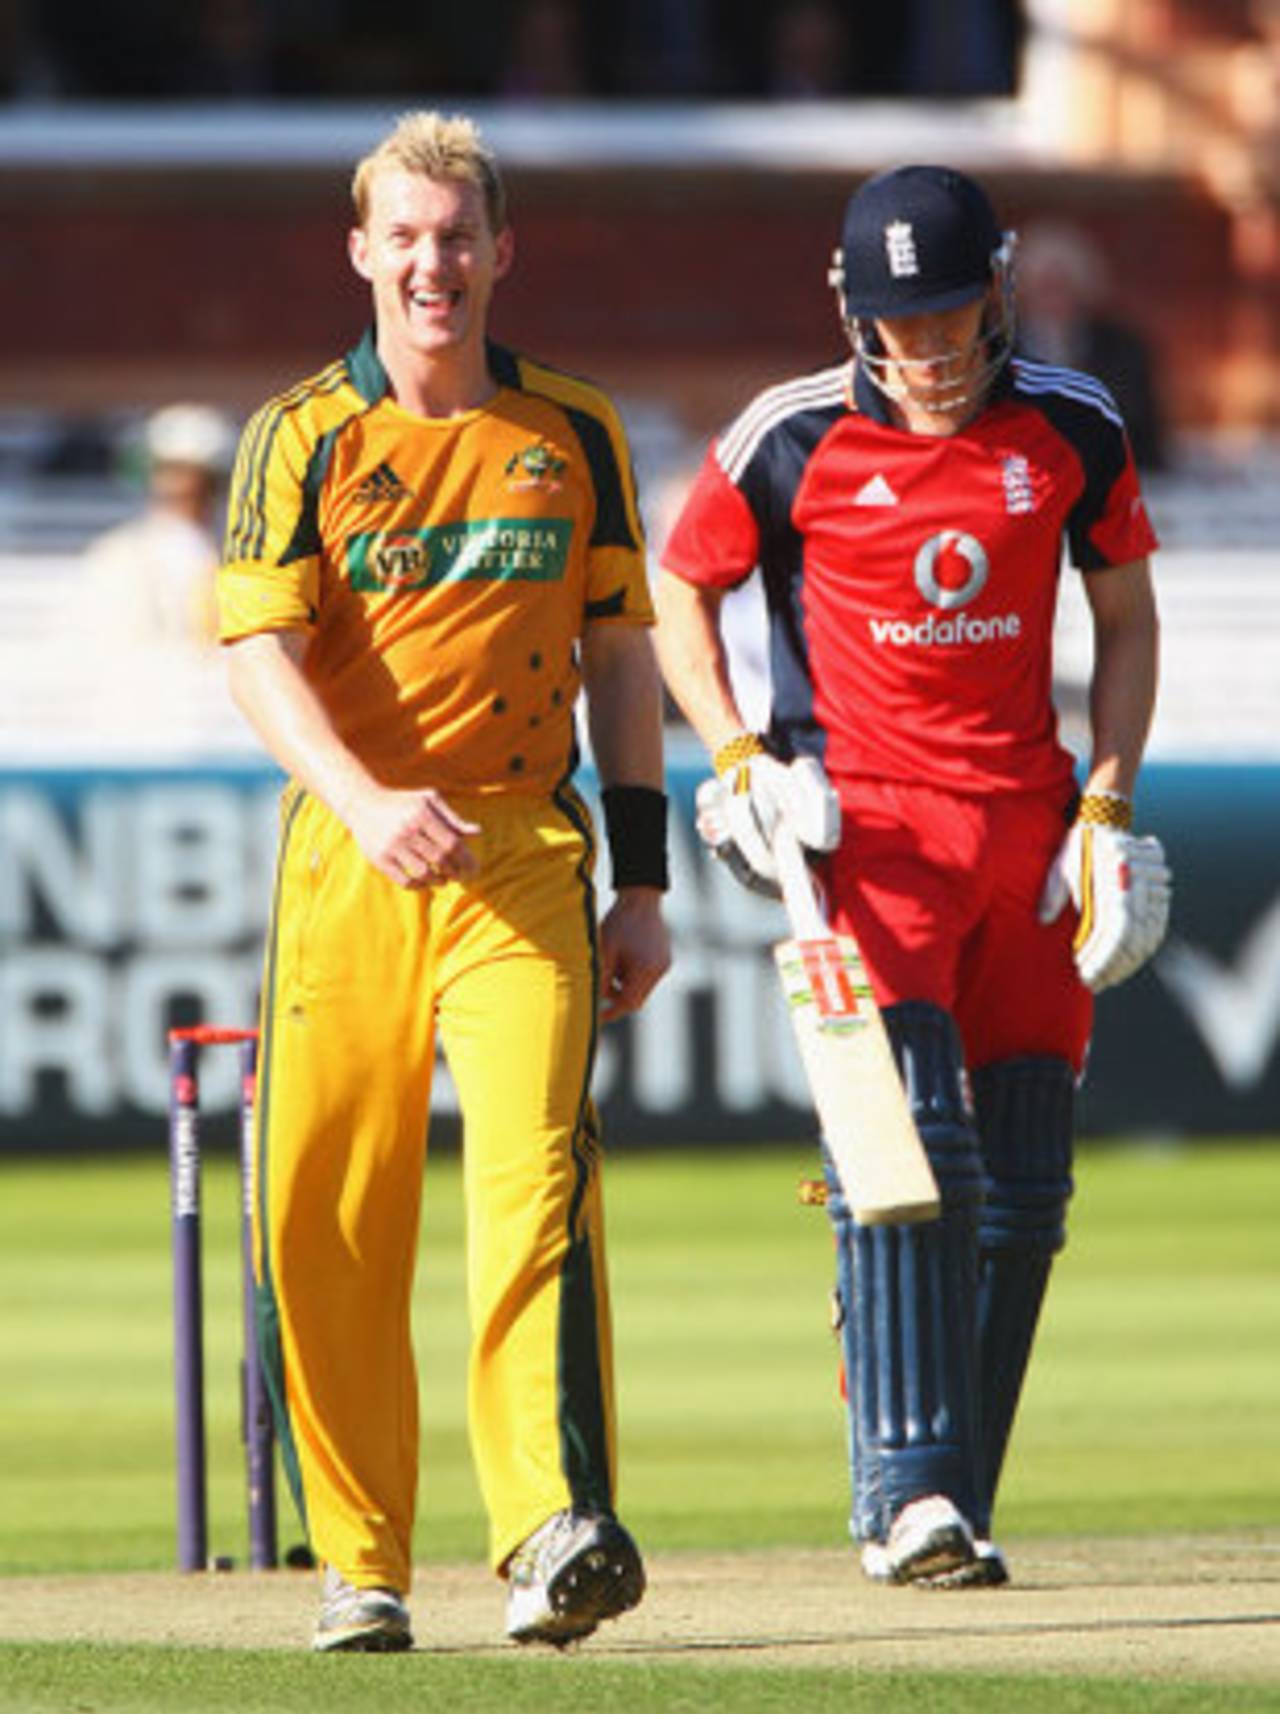 All smiles: Brett Lee had a day to savour at Lord's&nbsp;&nbsp;&bull;&nbsp;&nbsp;Getty Images